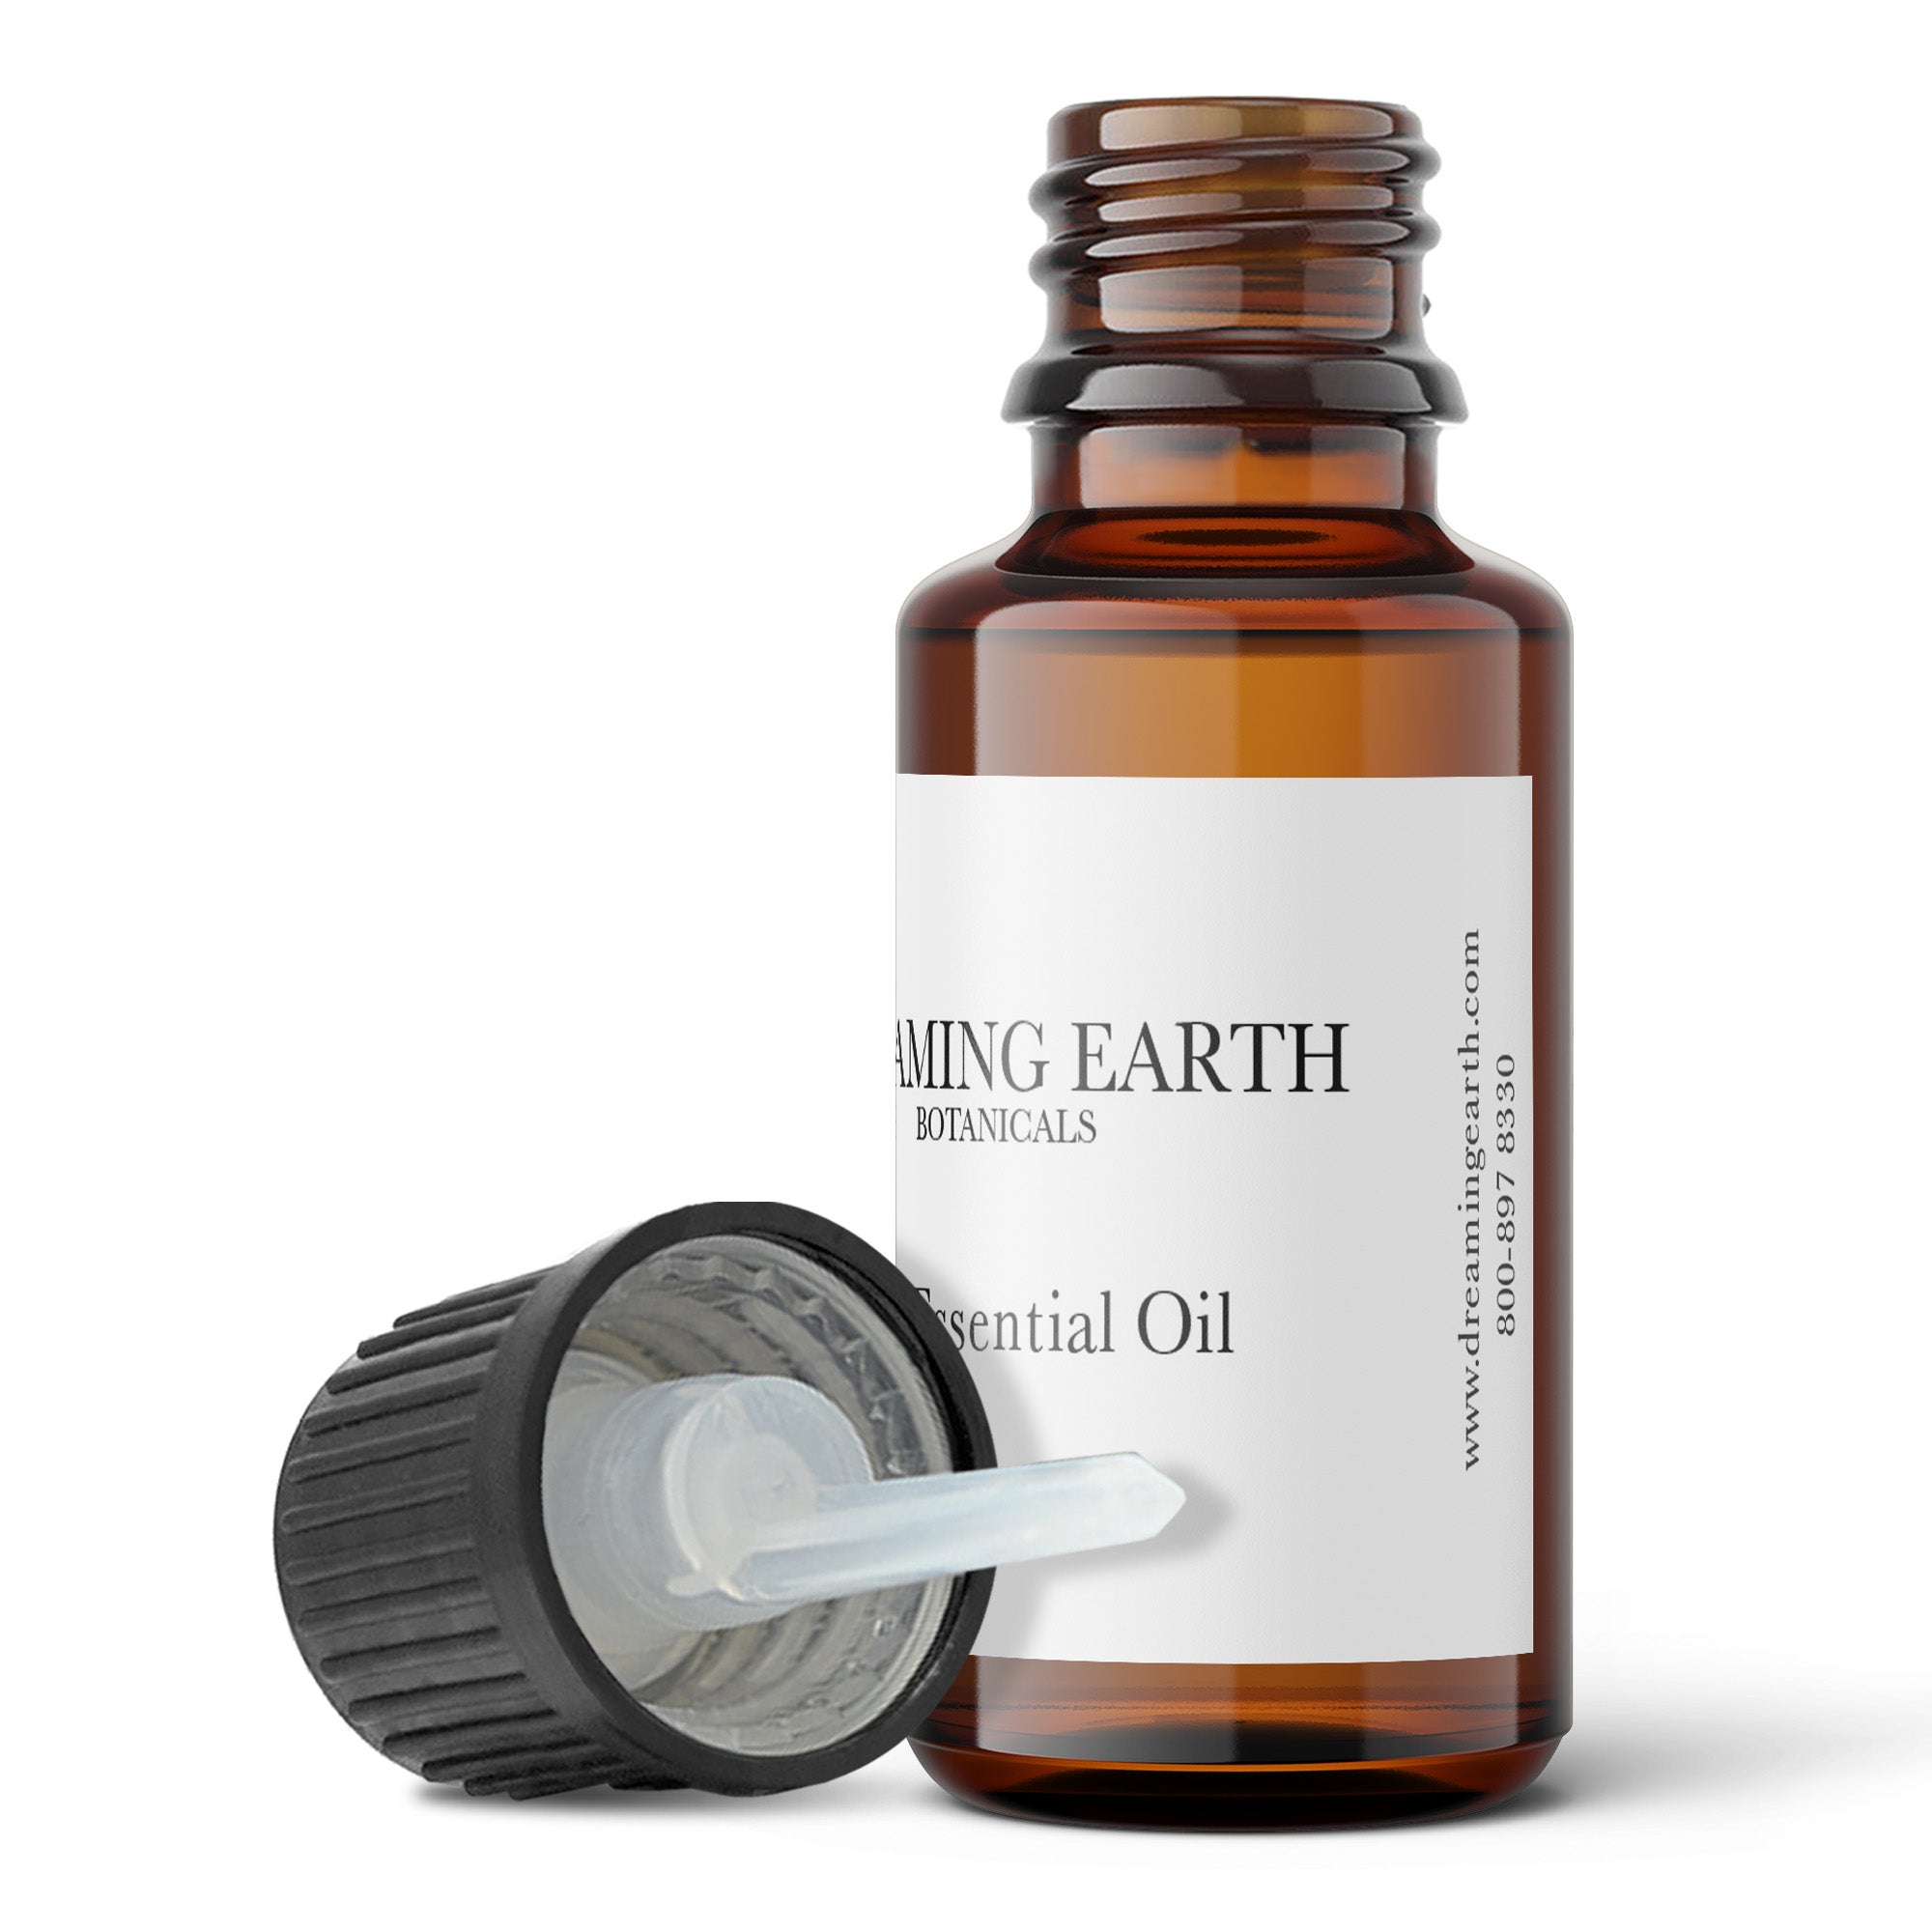 Load image into Gallery viewer, Lemongrass Essential Oil - Dreaming Earth Inc
